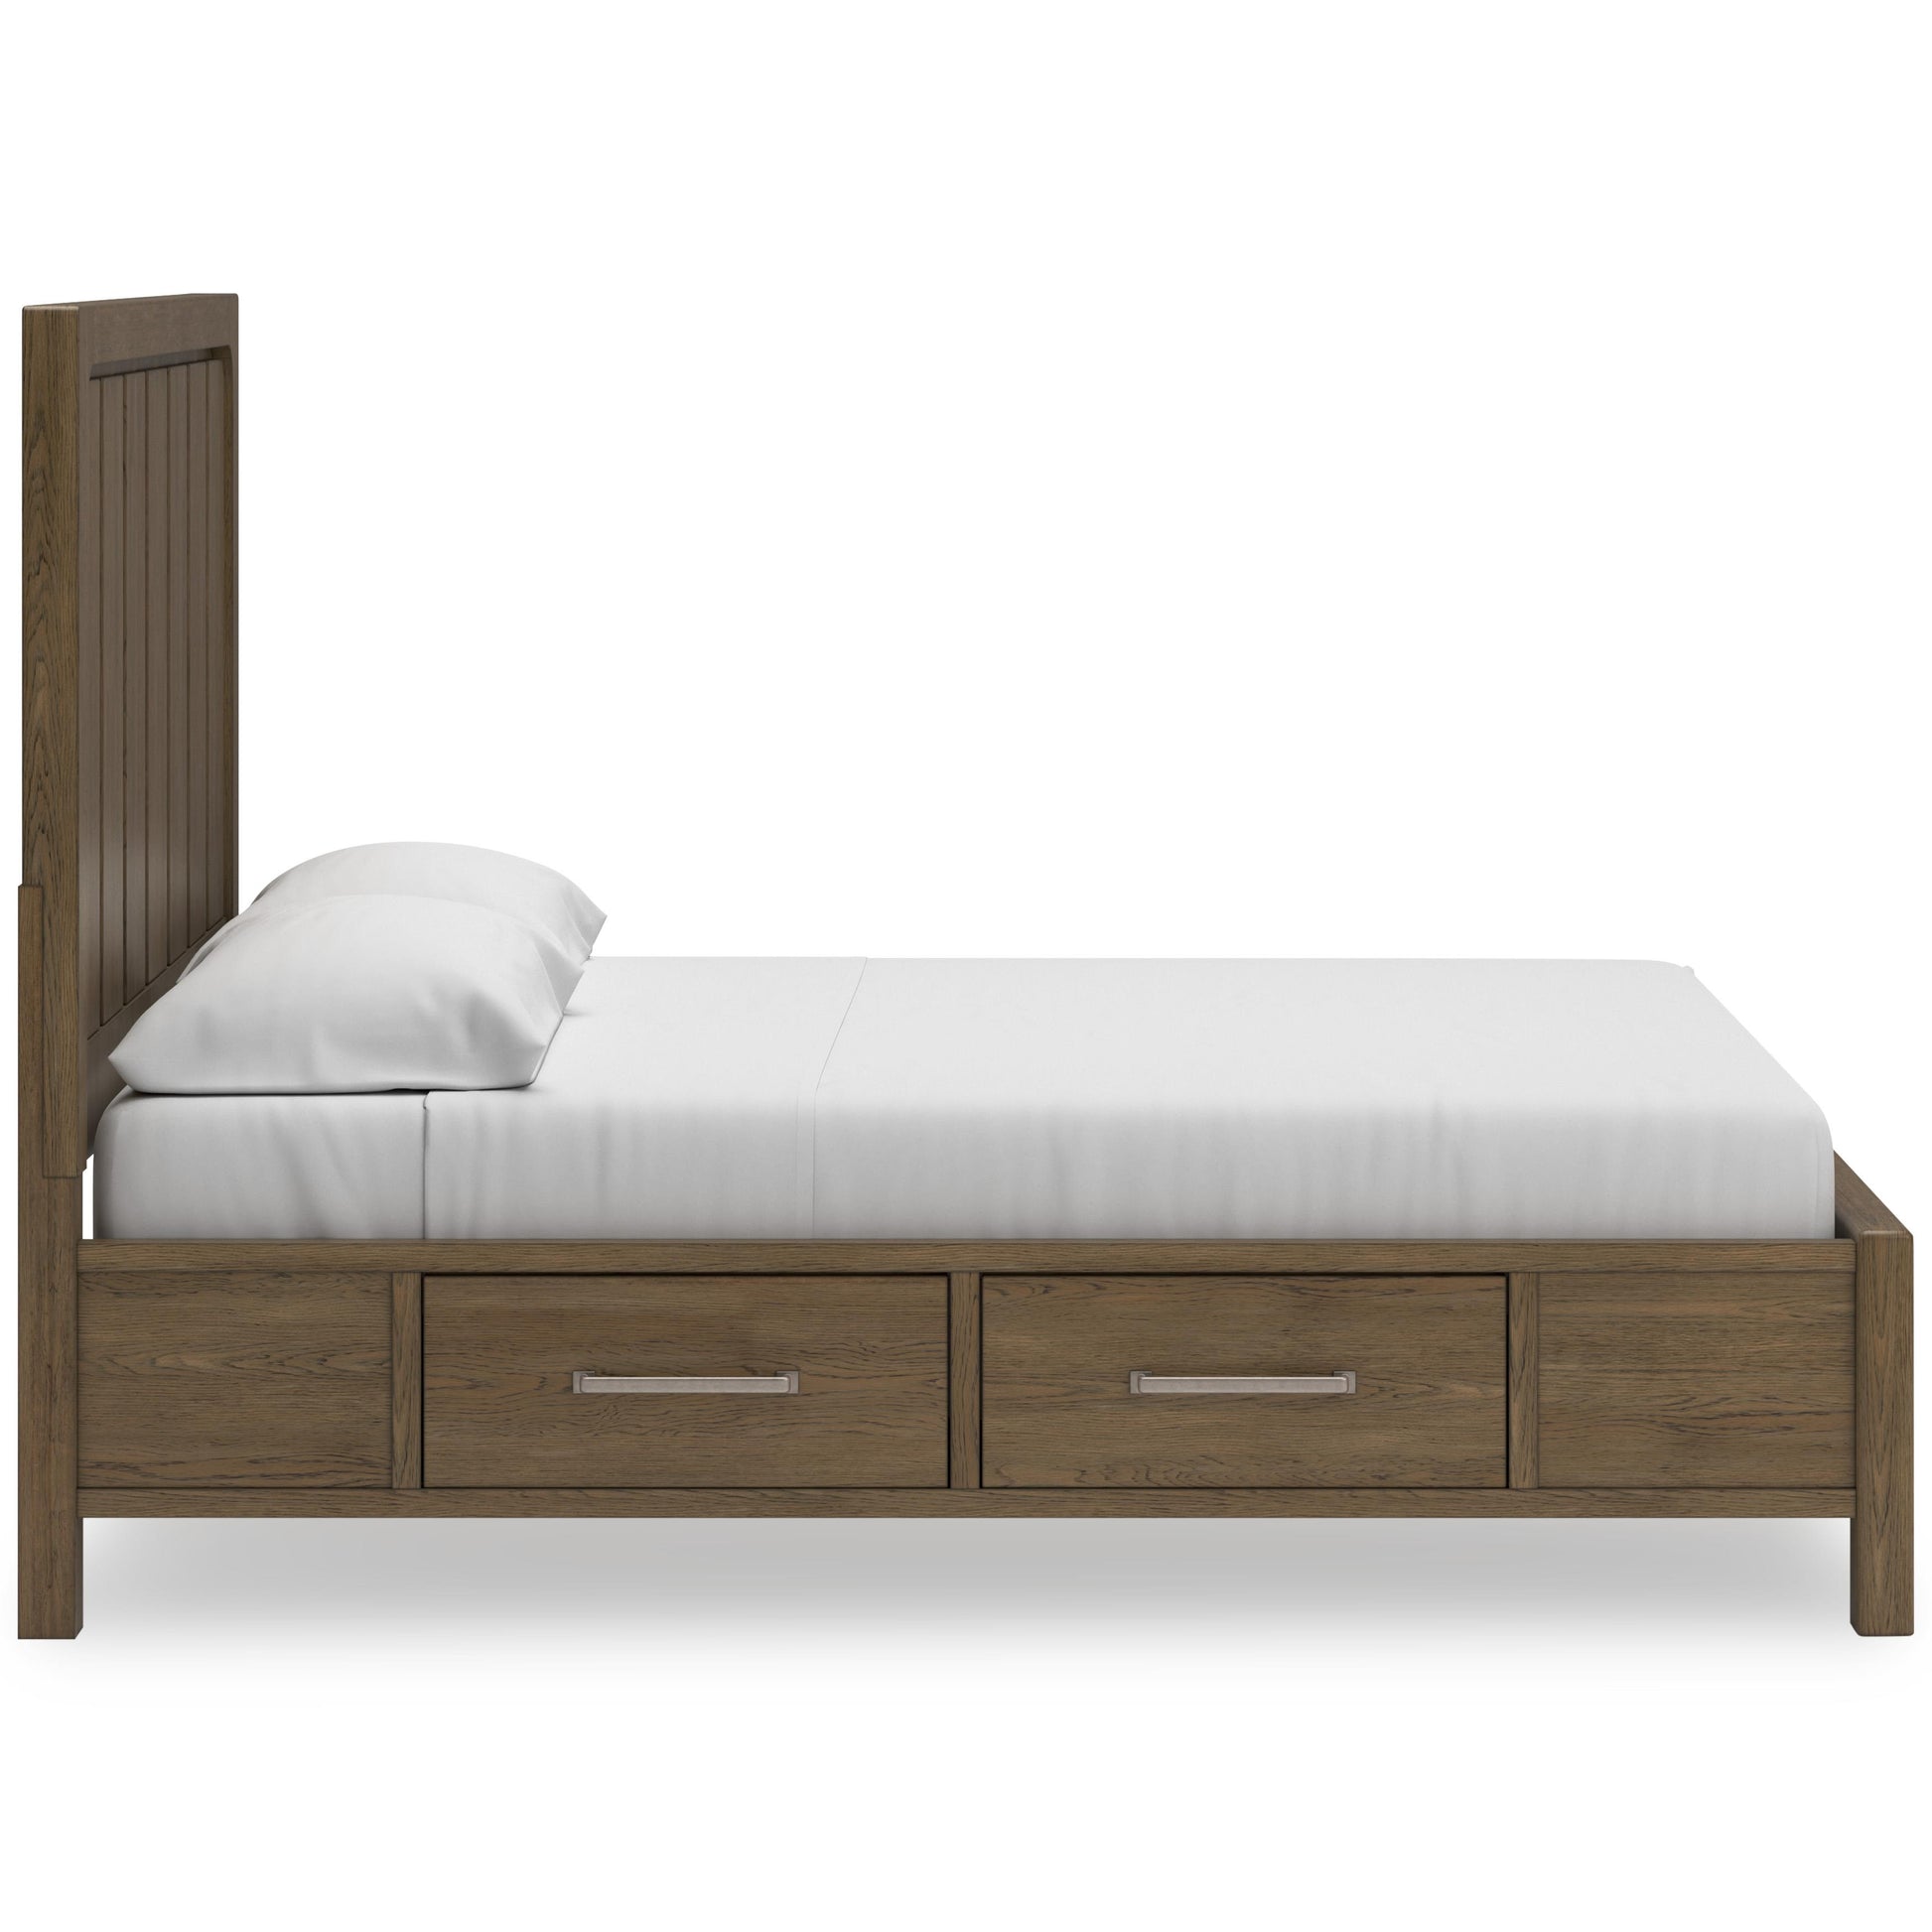 Signature Design by Ashley Cabalynn King Panel Bed with Storage B974-58/B974-56/B974-97S/B974-50 IMAGE 4